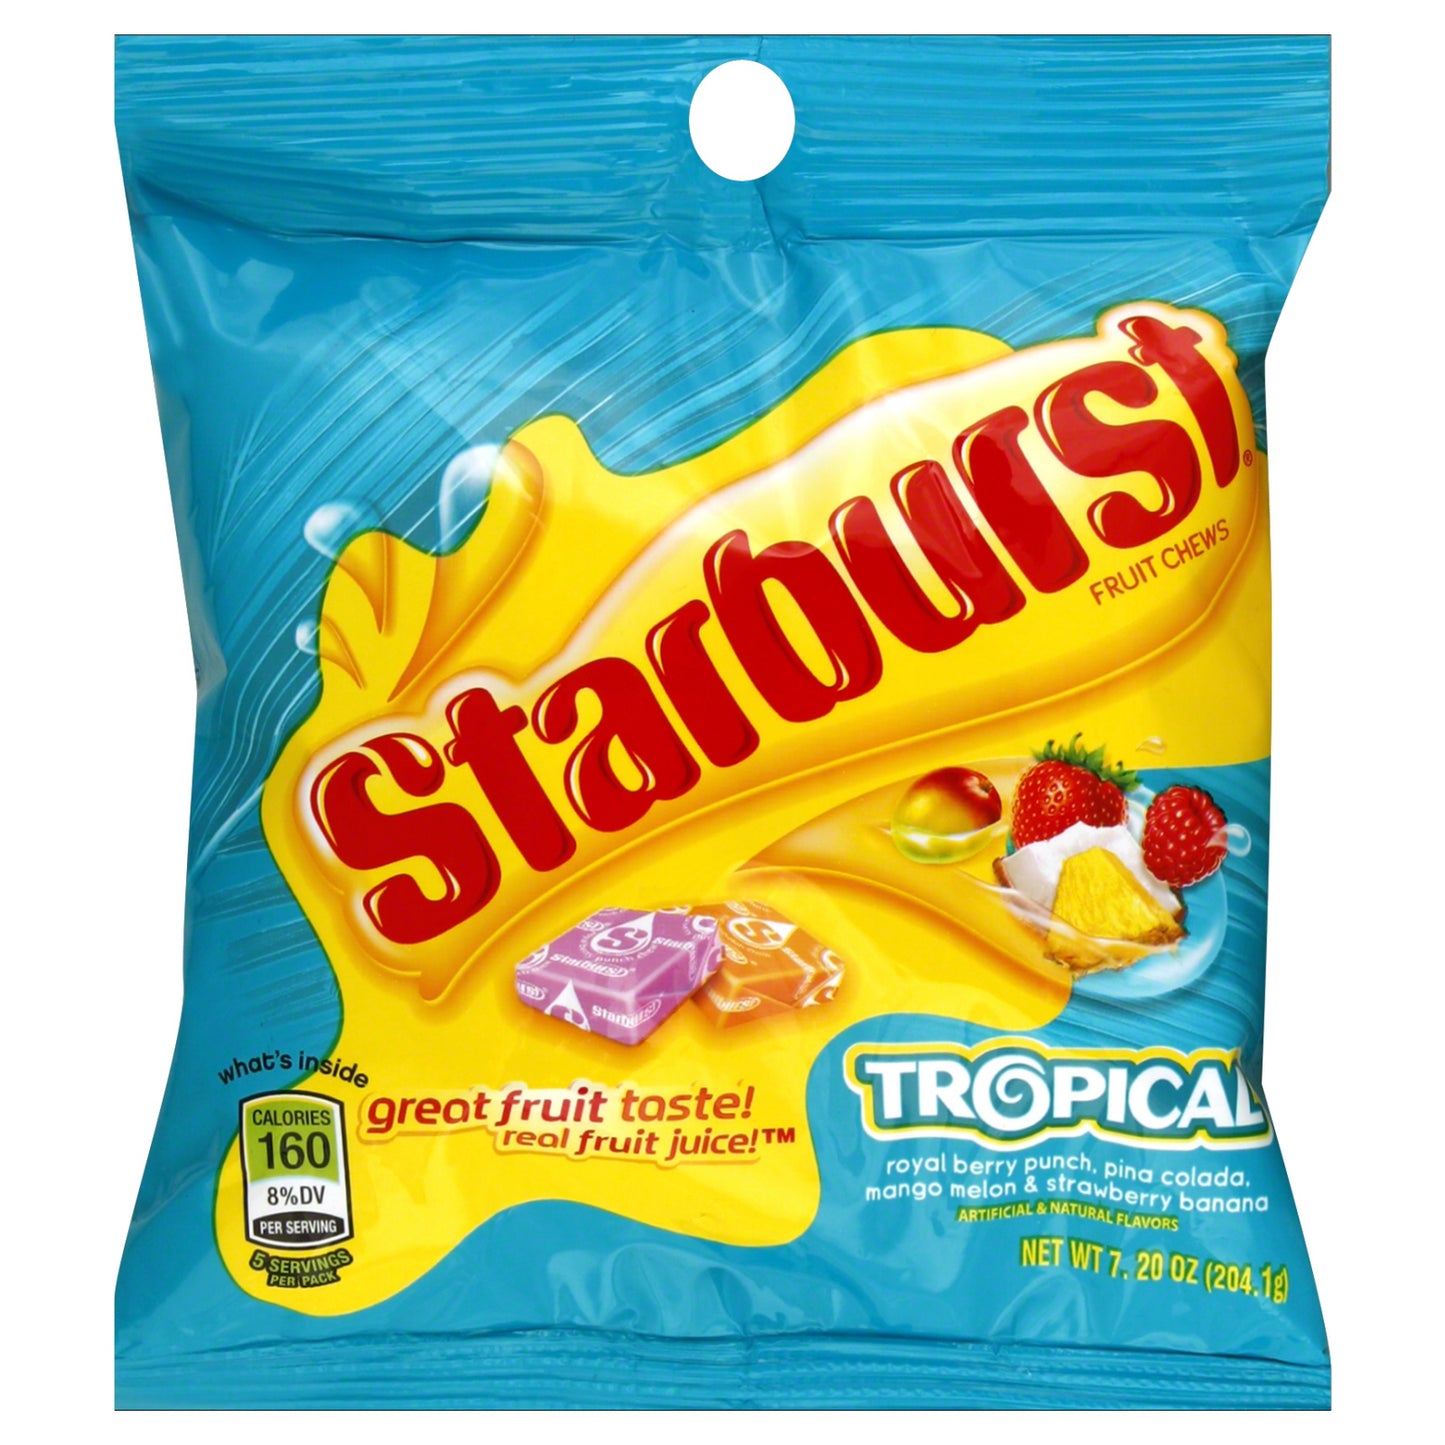 Starburst Tropical Fruit Chew Candy Peg Bag, 7.2 Ounce